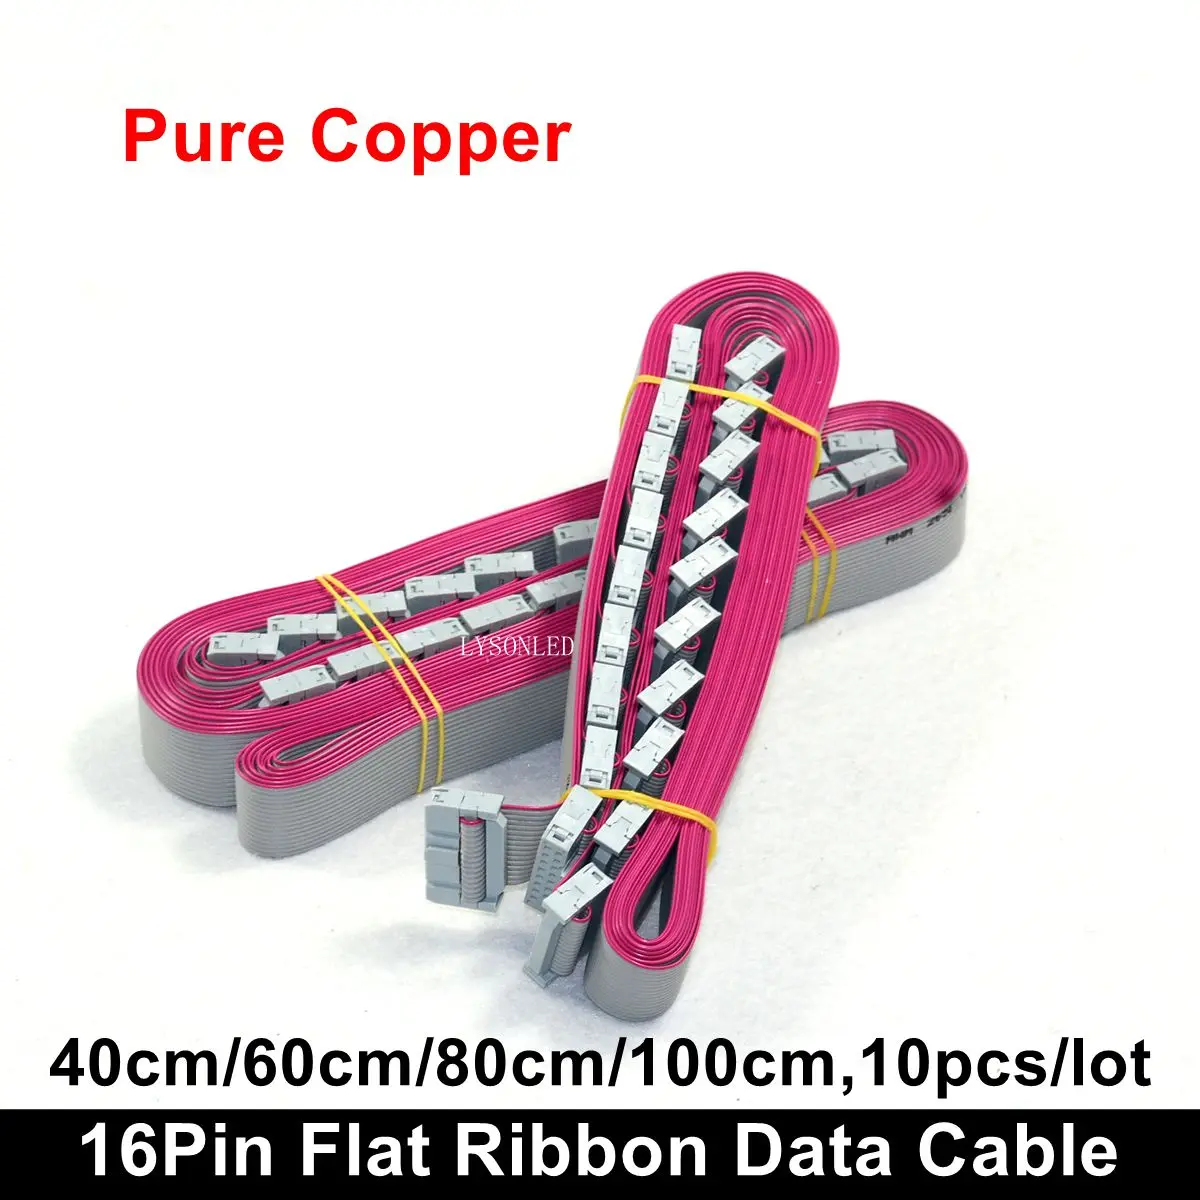 

10 pcs/lot 60cm 100cm Length LED Display Screen 16Pin Flat Ribbon Data Cables , Pure Copper Signal Cables Connect Card to Module